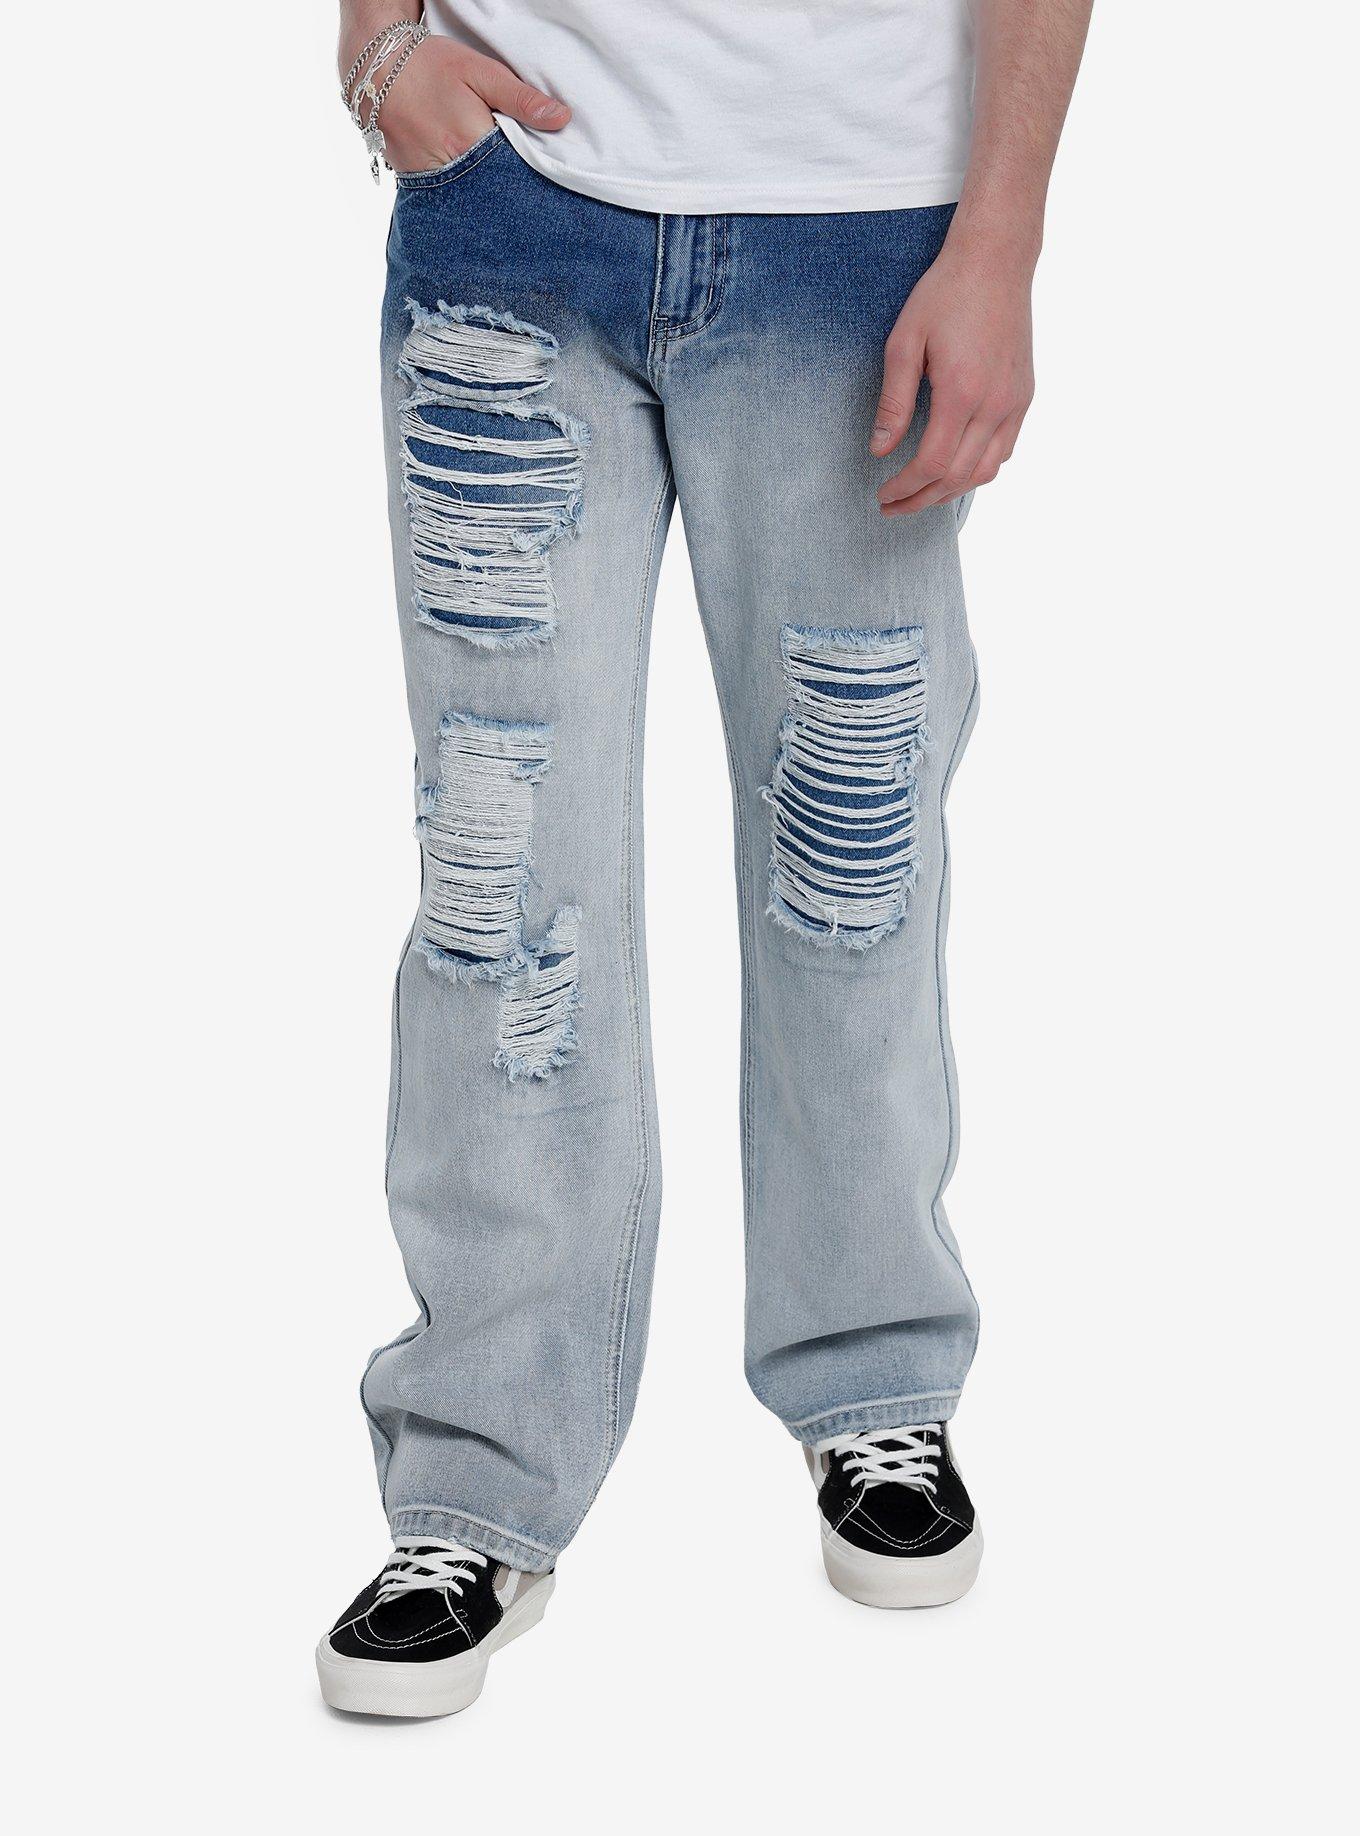 Took a chance on these jeans from The Kript at they go all the way